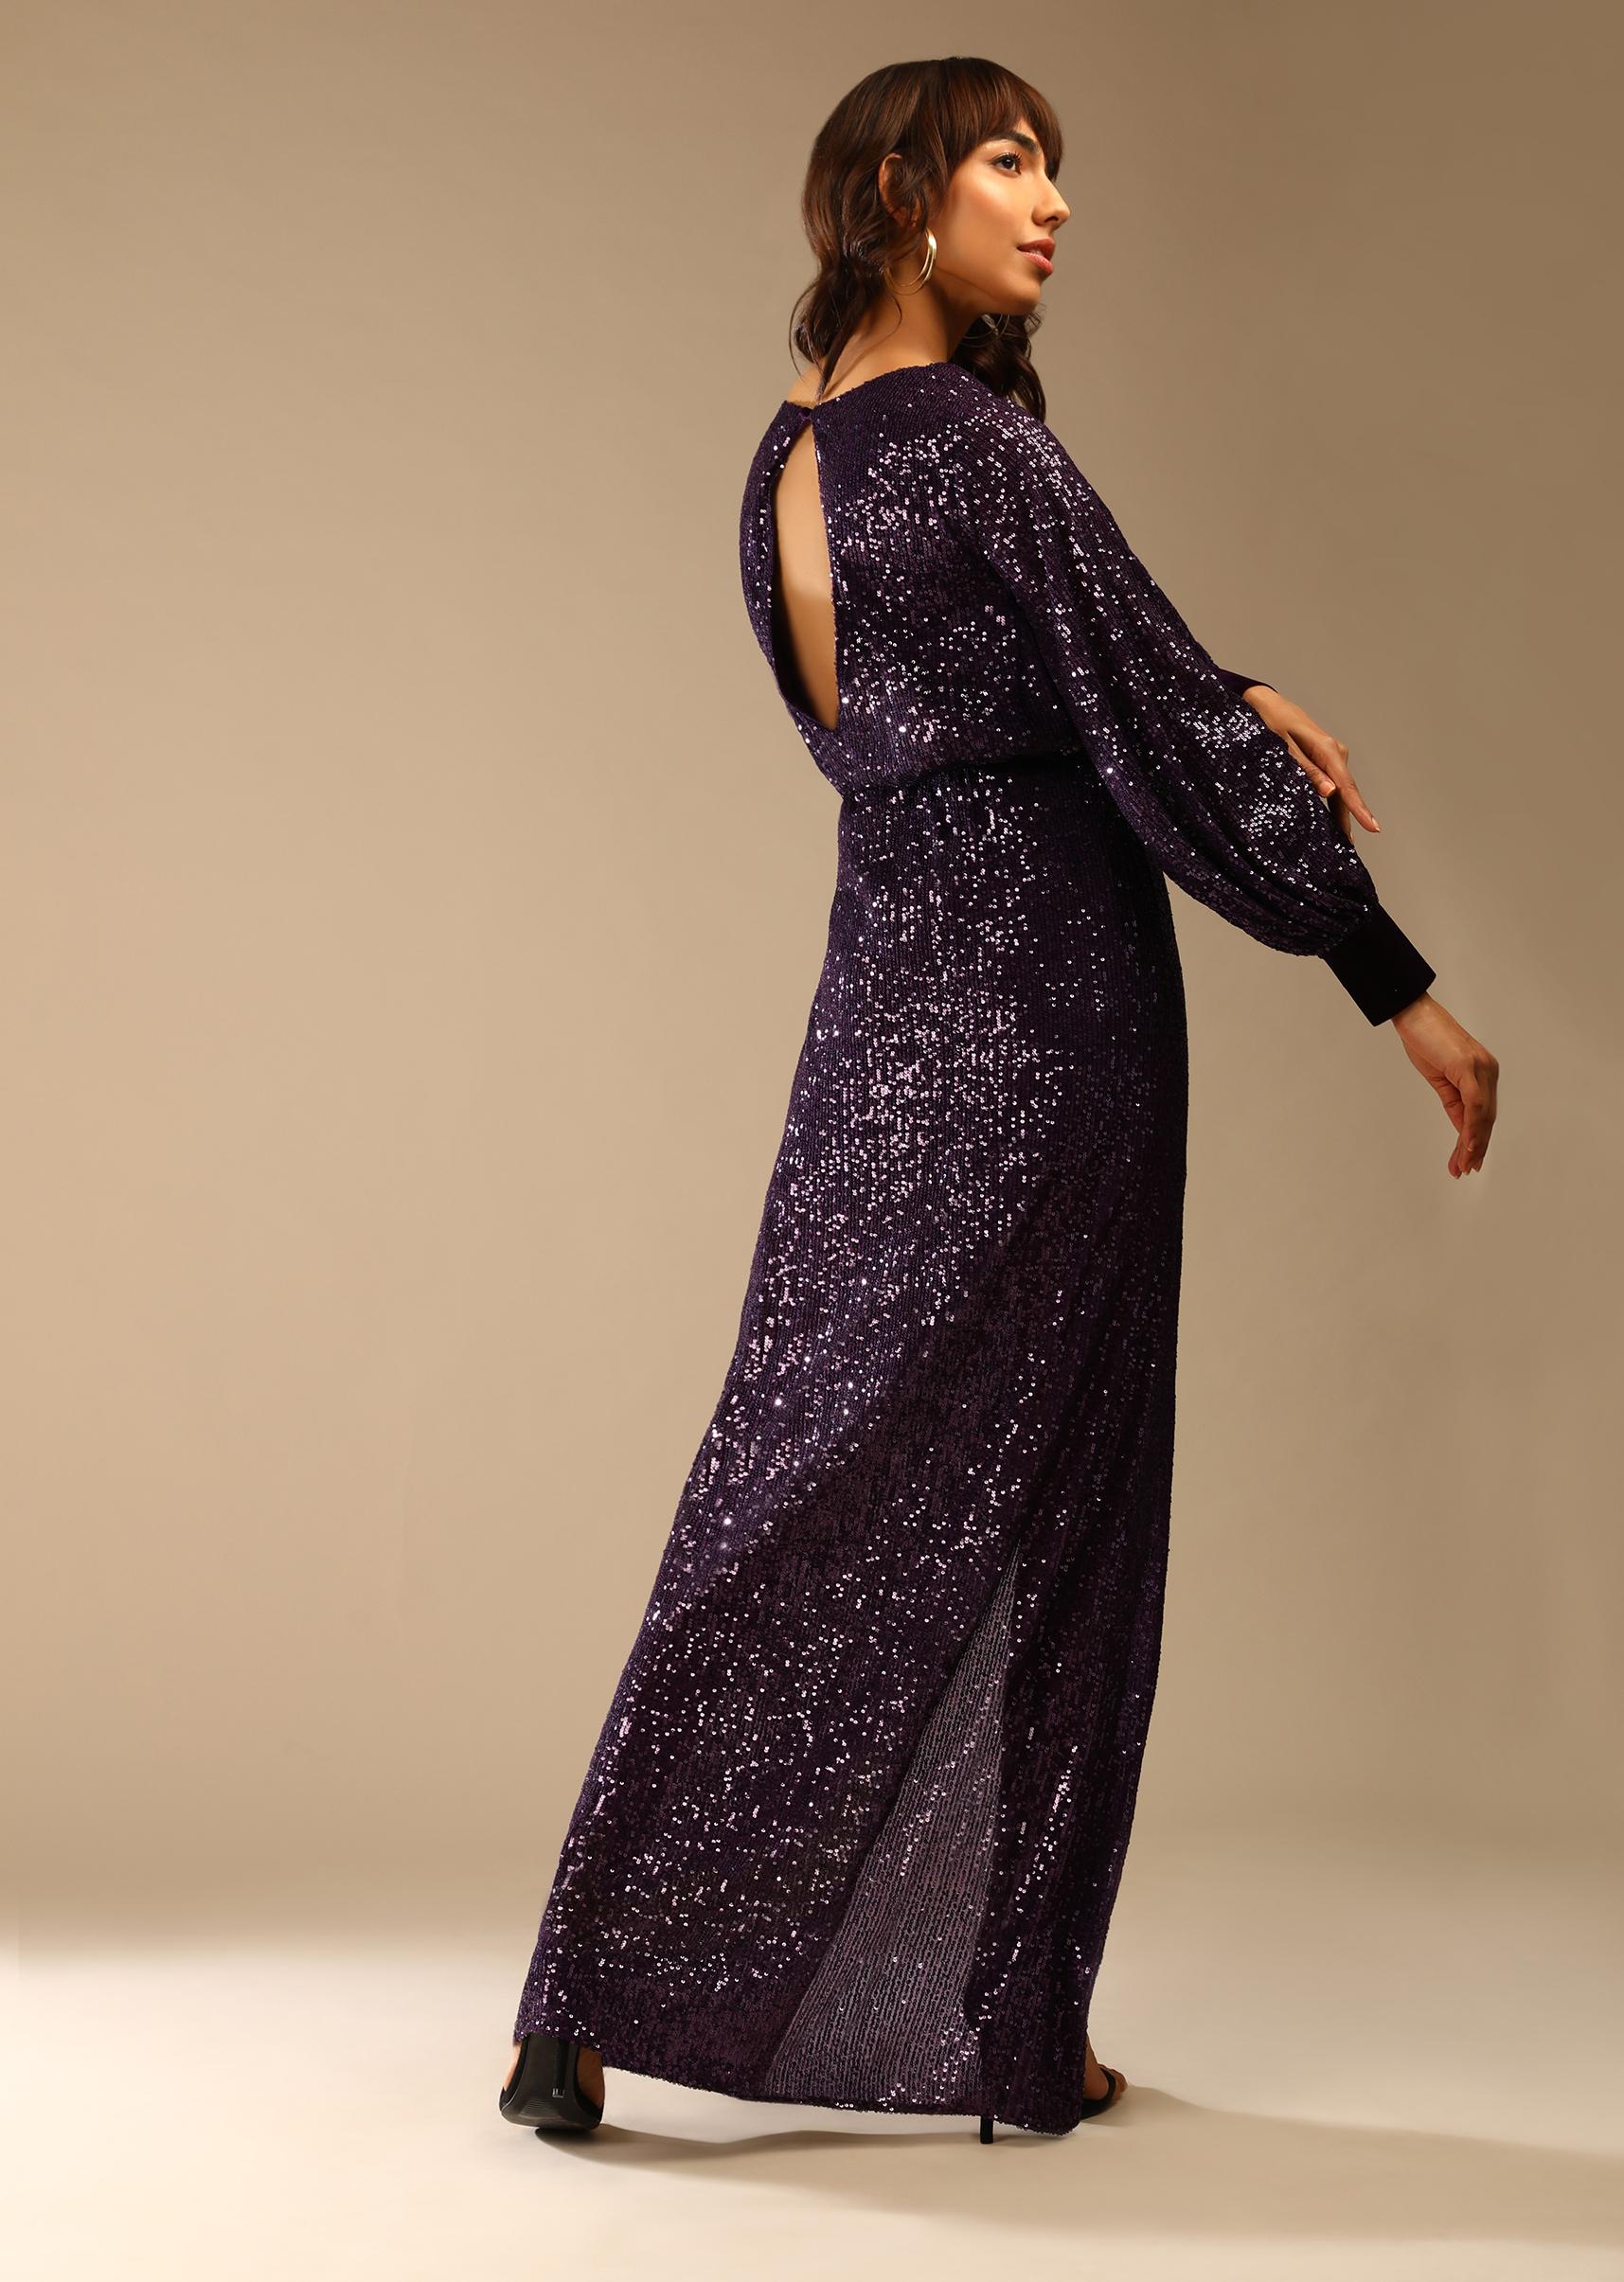 Kalki Fashion,M001TR363Y-SG66849,Wine Purple Gown Embellished In Sequins With Cowl Neckline And Peasant Sleeves